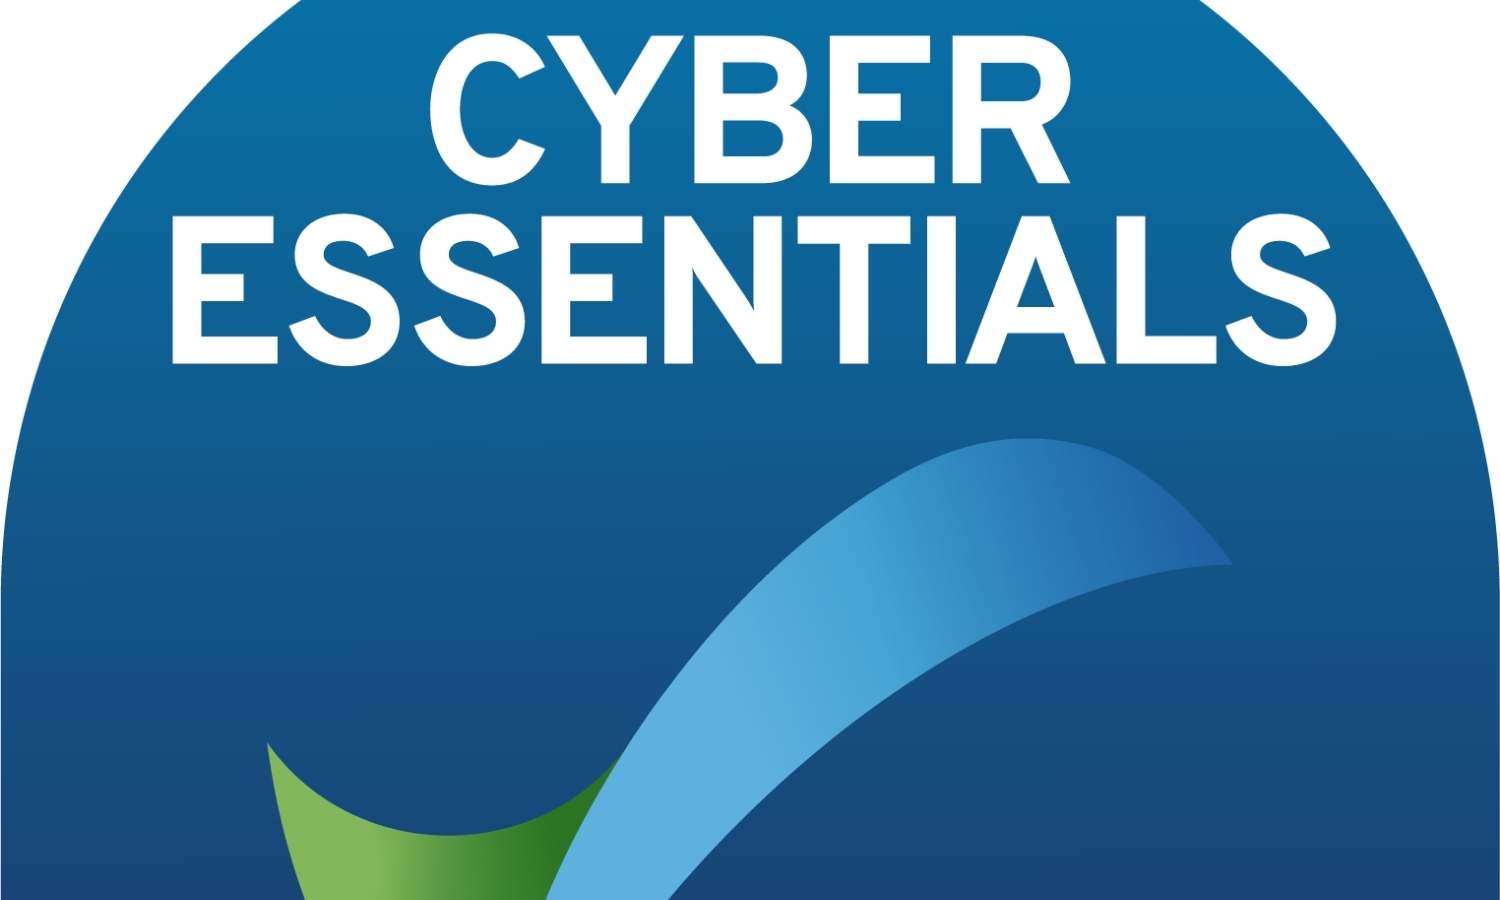 Nowell Meller are very proud to officially be Cyber Essentials Certified